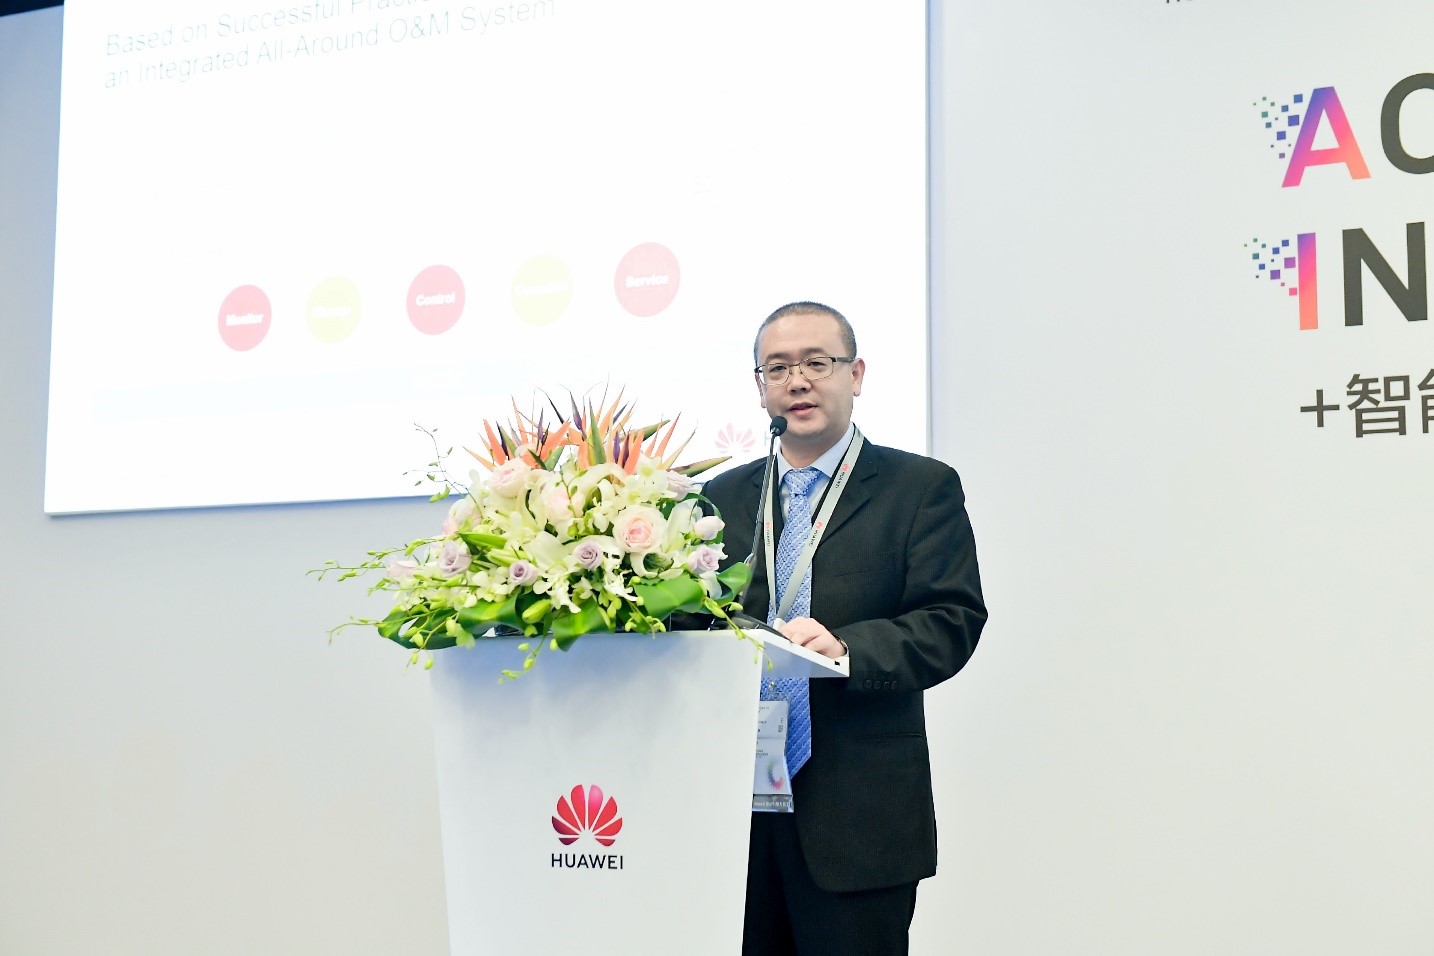 Huawei's Ye Zhonghua, Director of the Enterprise Business Professional Service Department, speaking at the IMOC launch